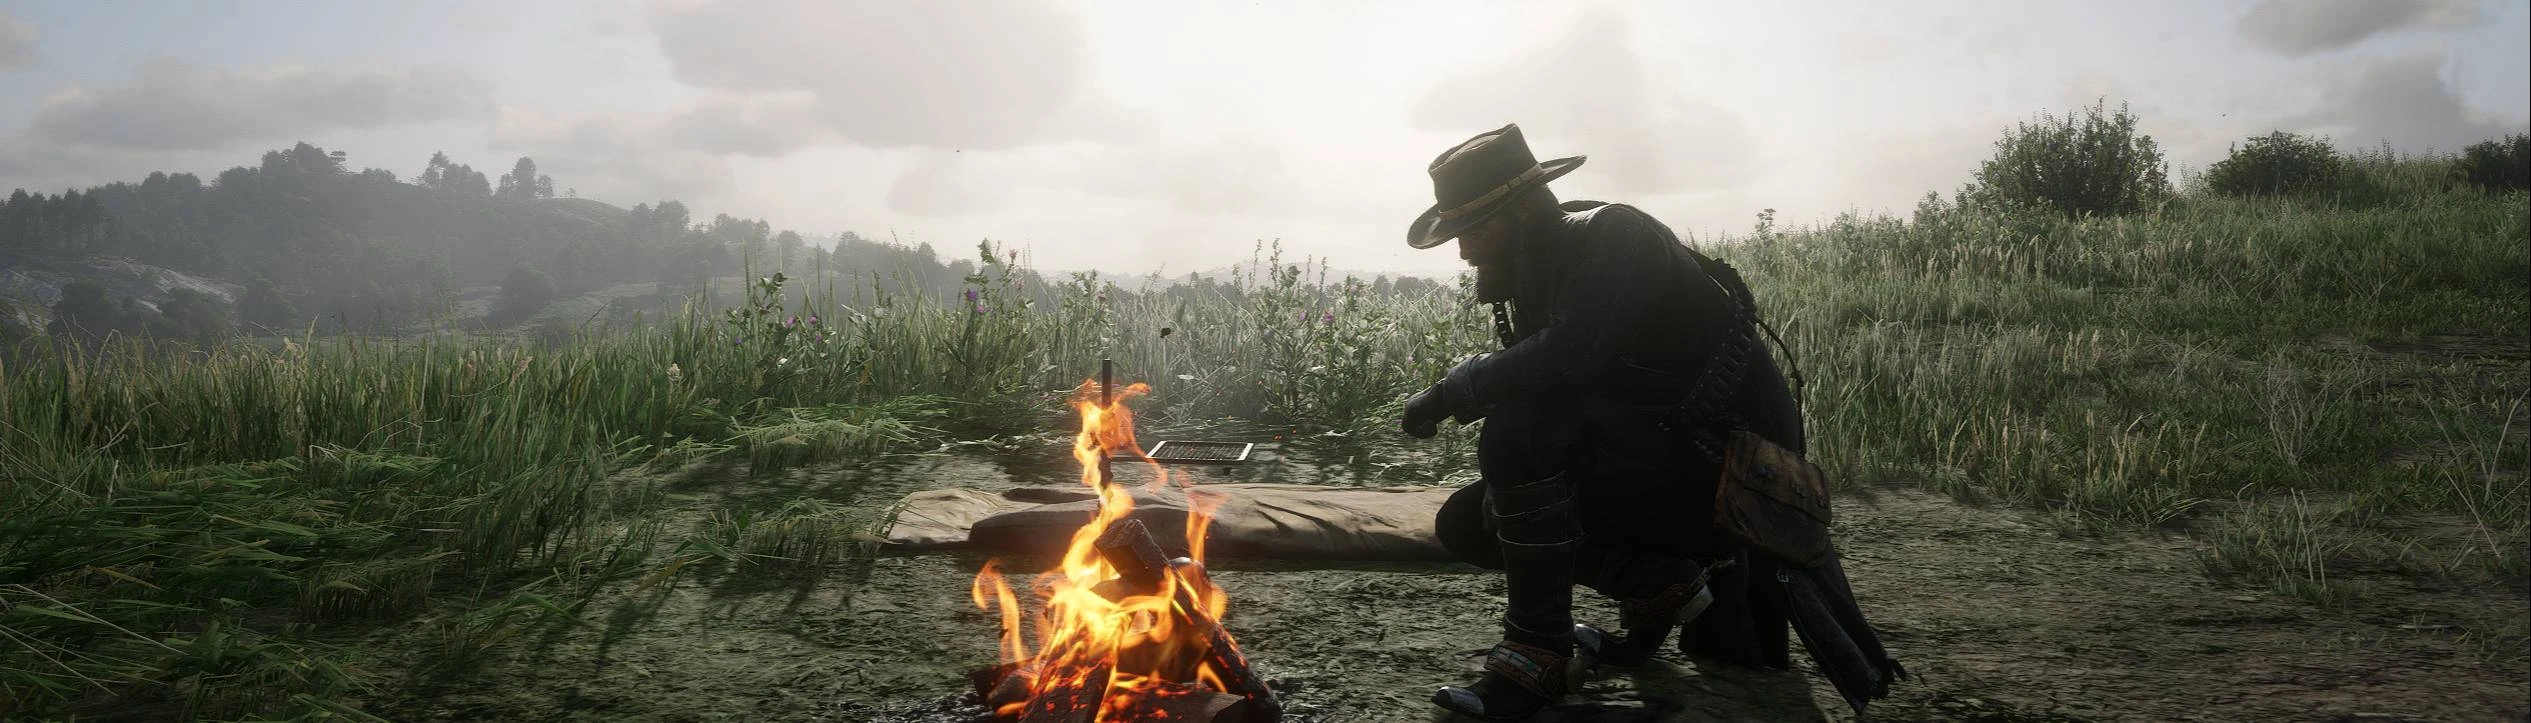 Hanging At The Camp at Red Dead Redemption 2 Nexus - Mods and community